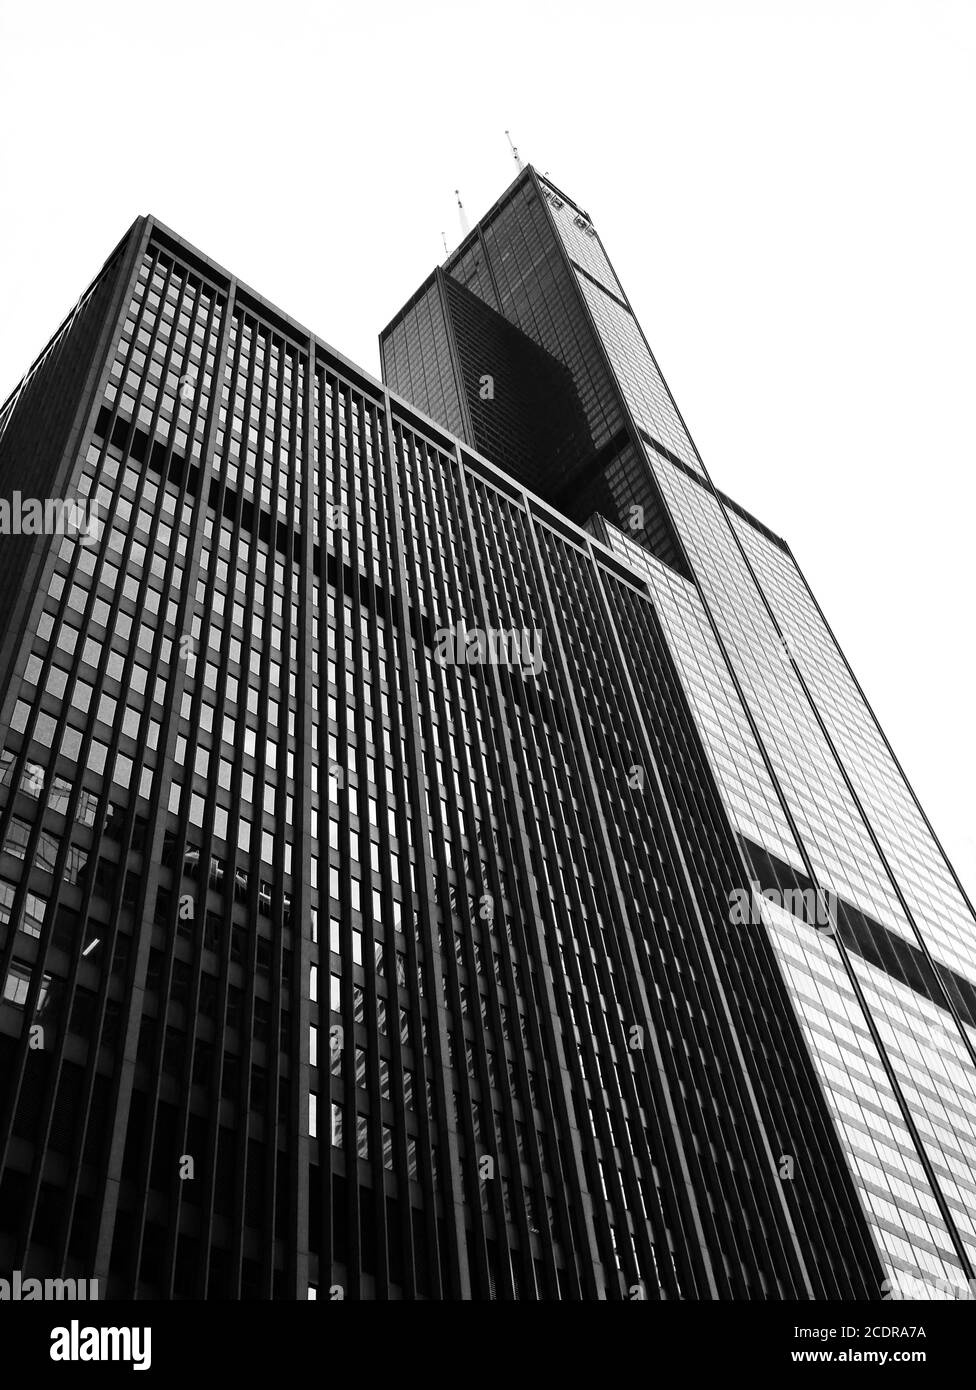 Looking up at Willis Tower / Sears Tower in Chicago, USA from ground level. Looming black skyscraper designed by Fazlur Rahman Khan. Stock Photo